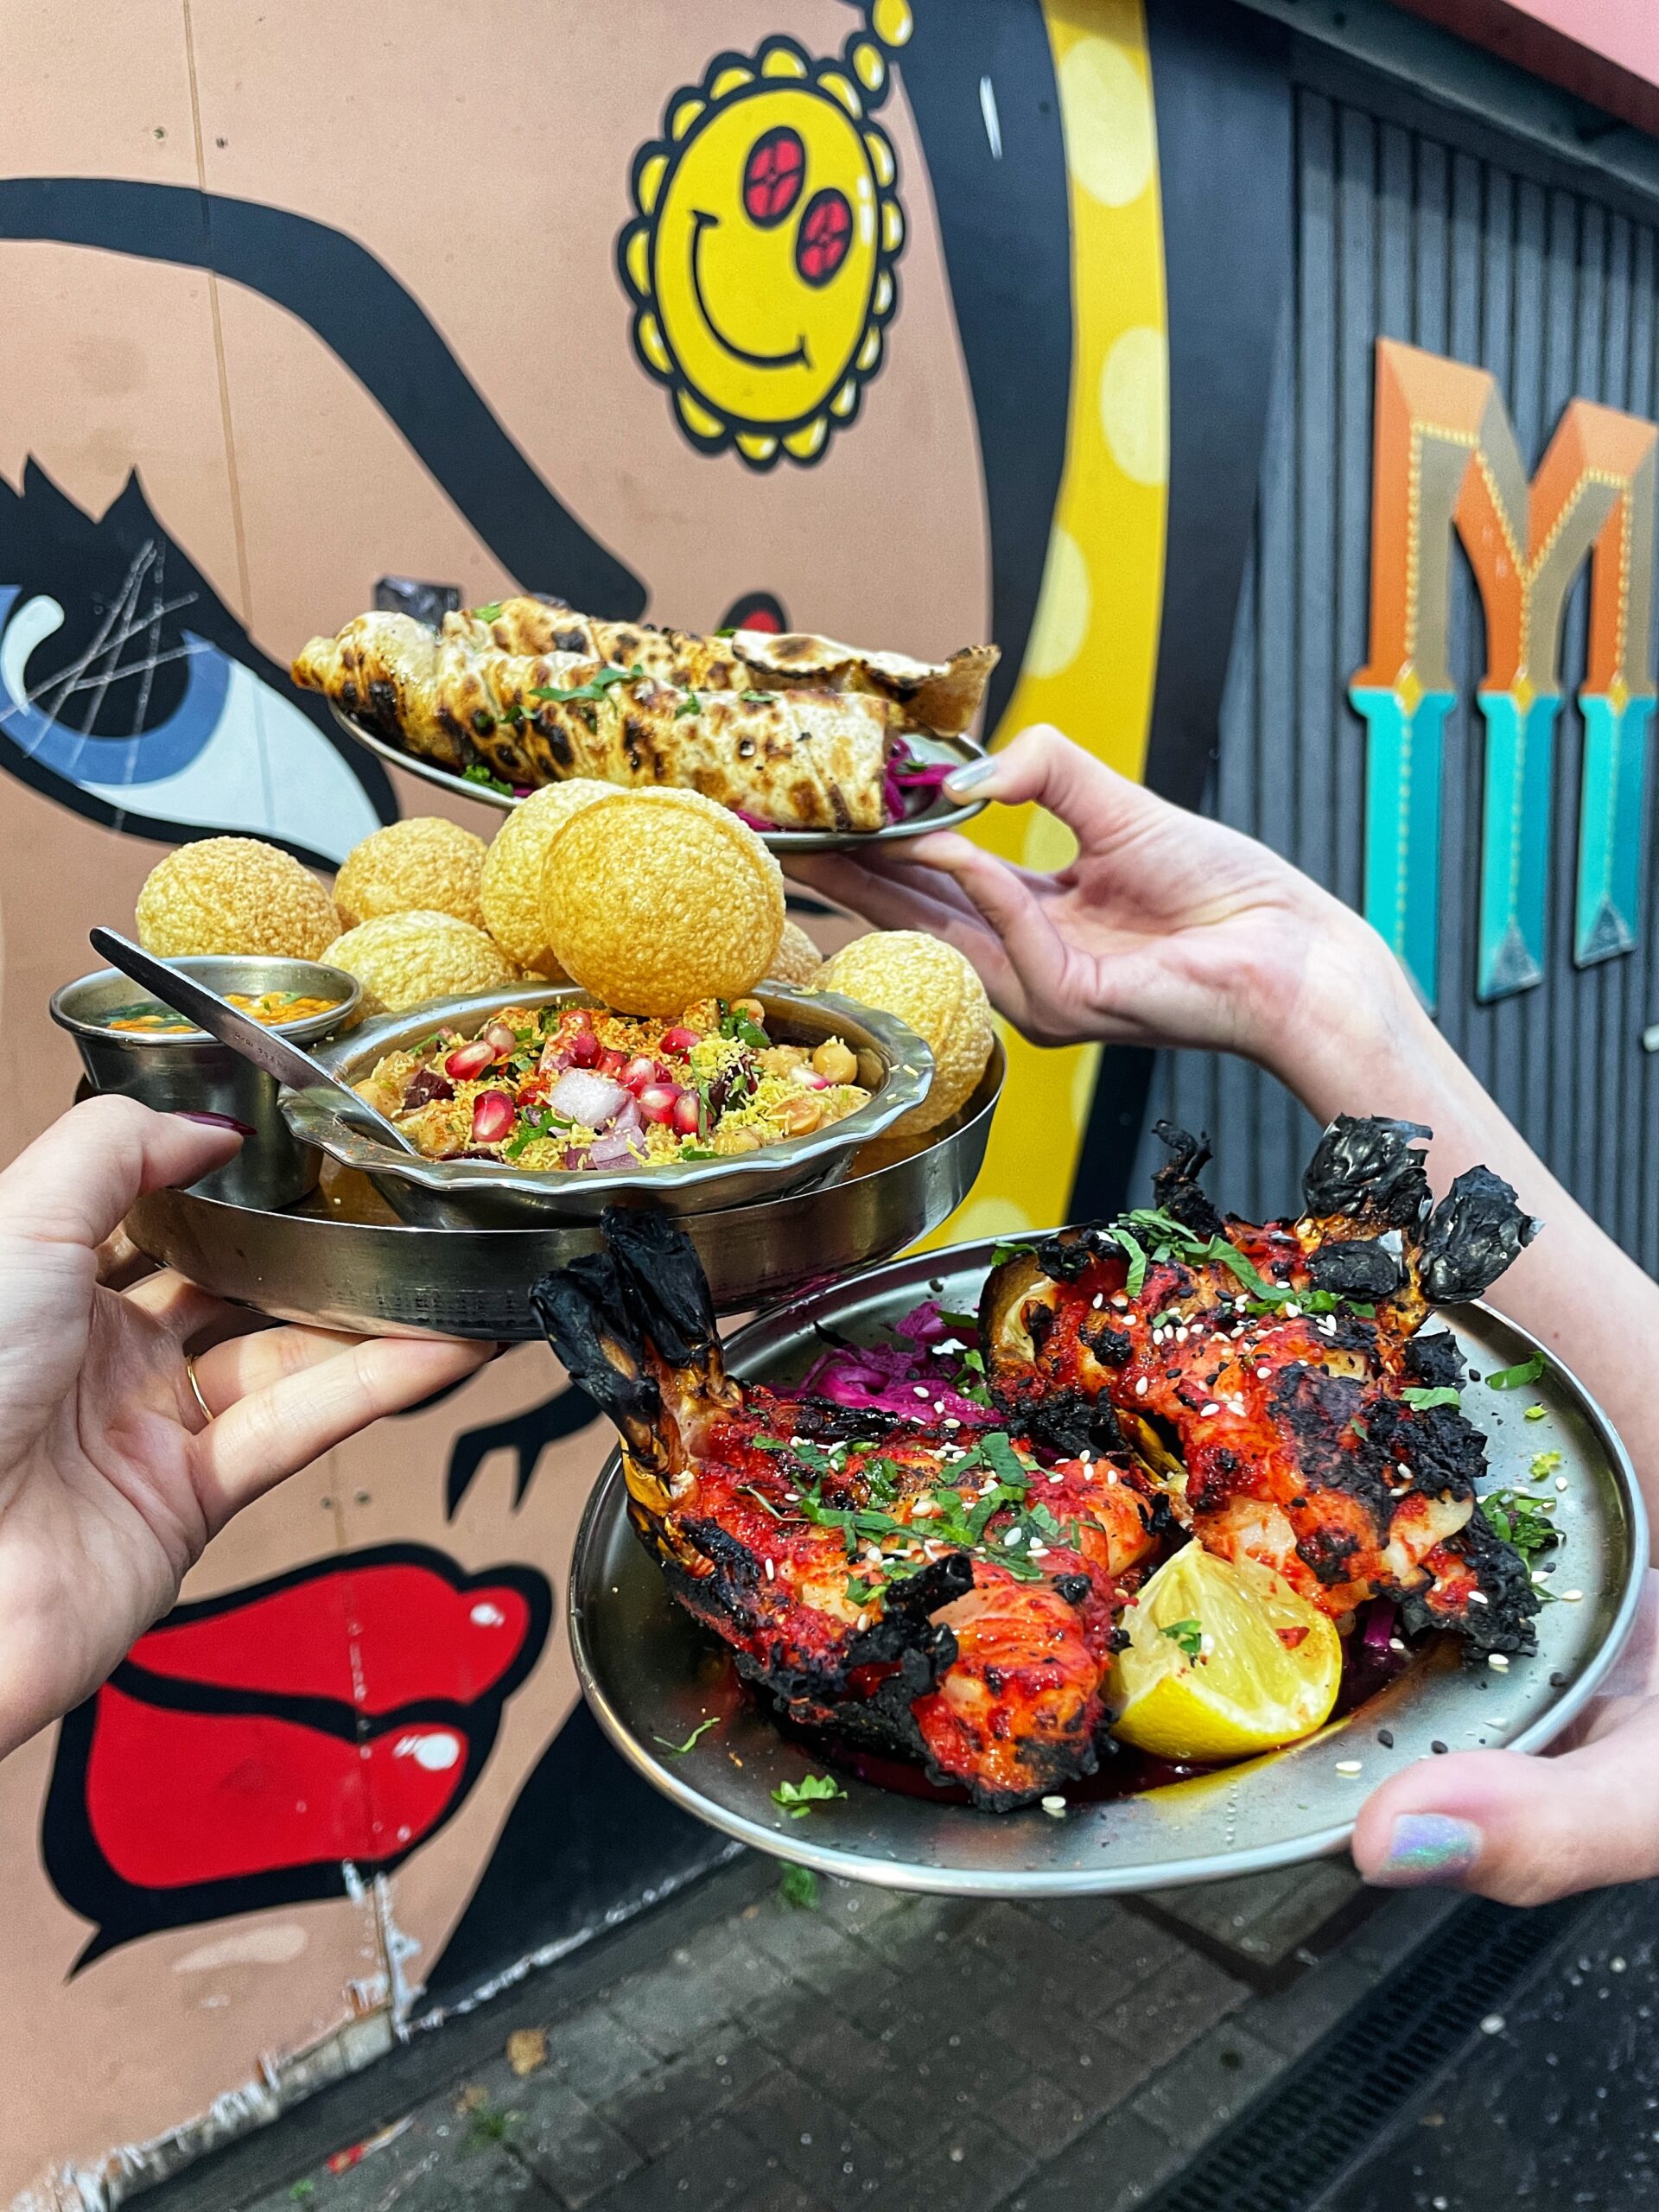 Mughli on Manchester's curry mile